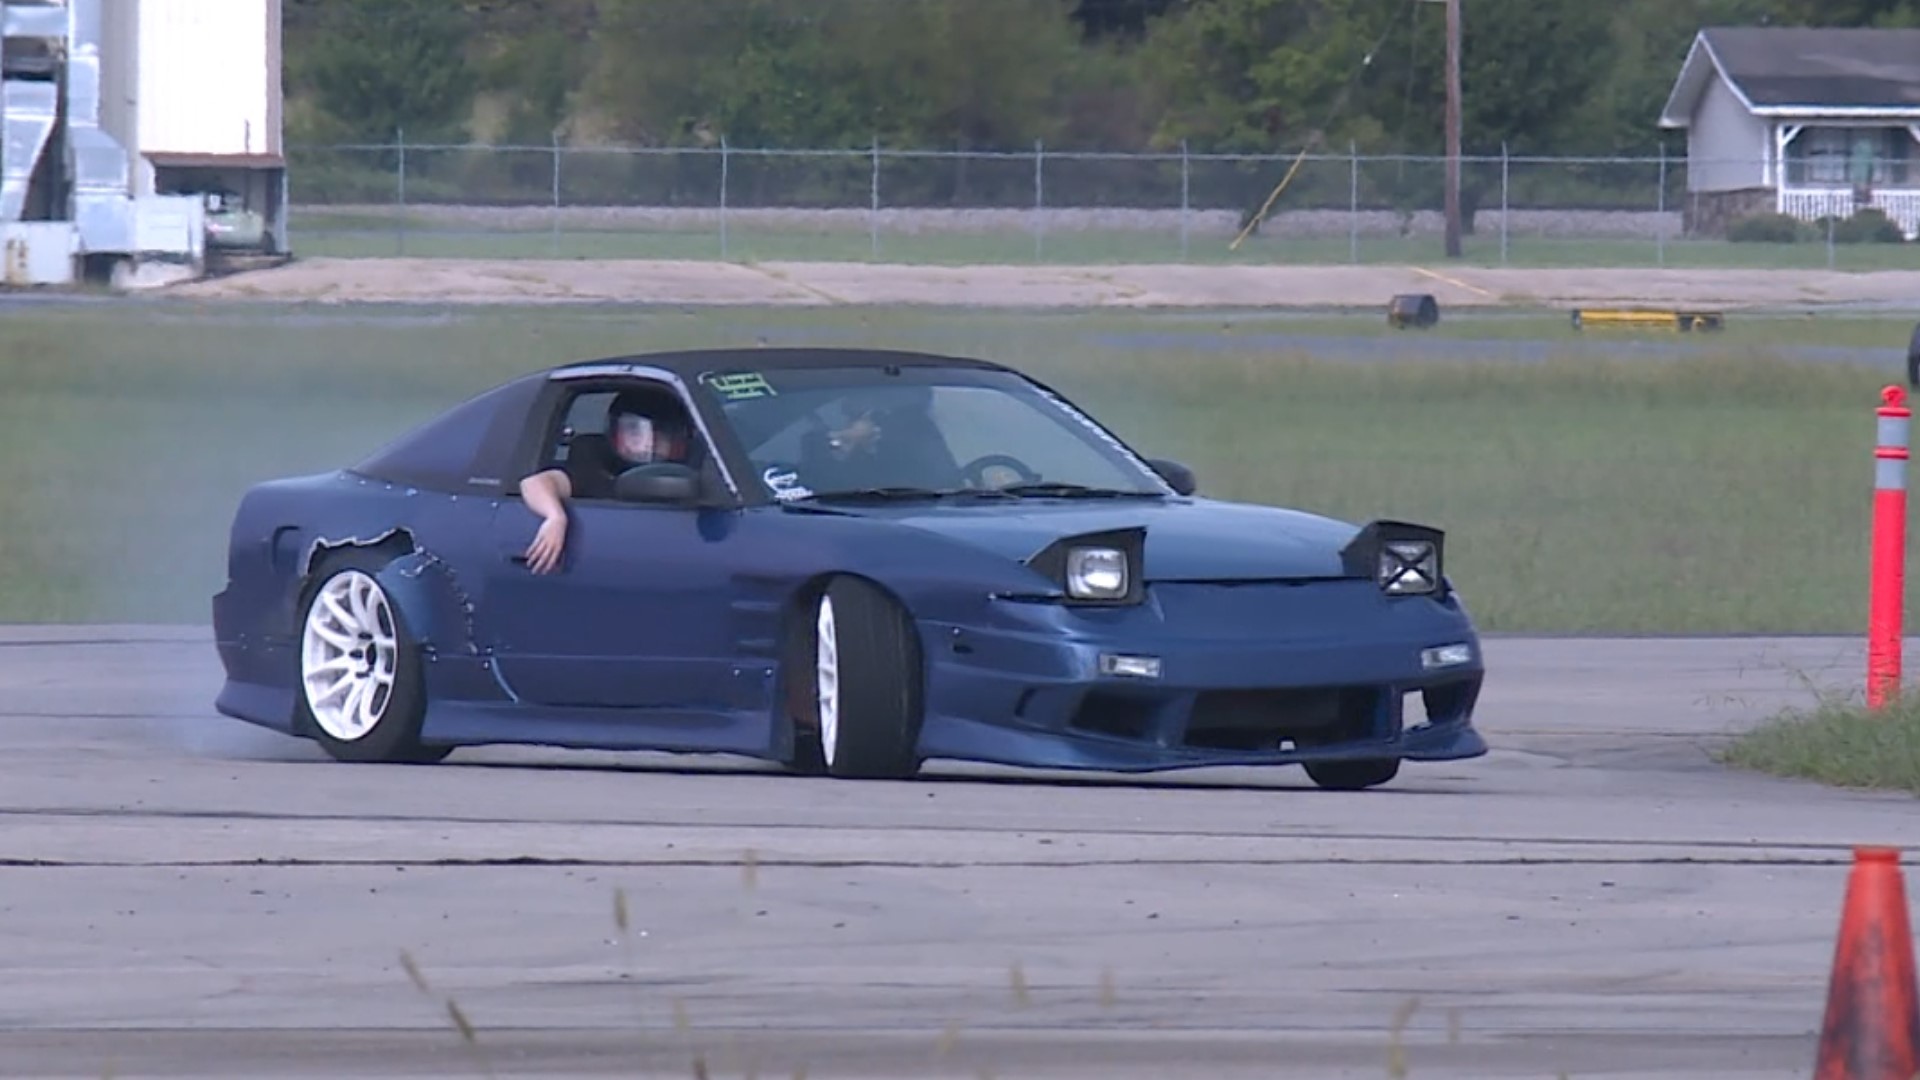 Drifters piled in at Drake Field on Sunday, Sept. 24 for Drift NWA.